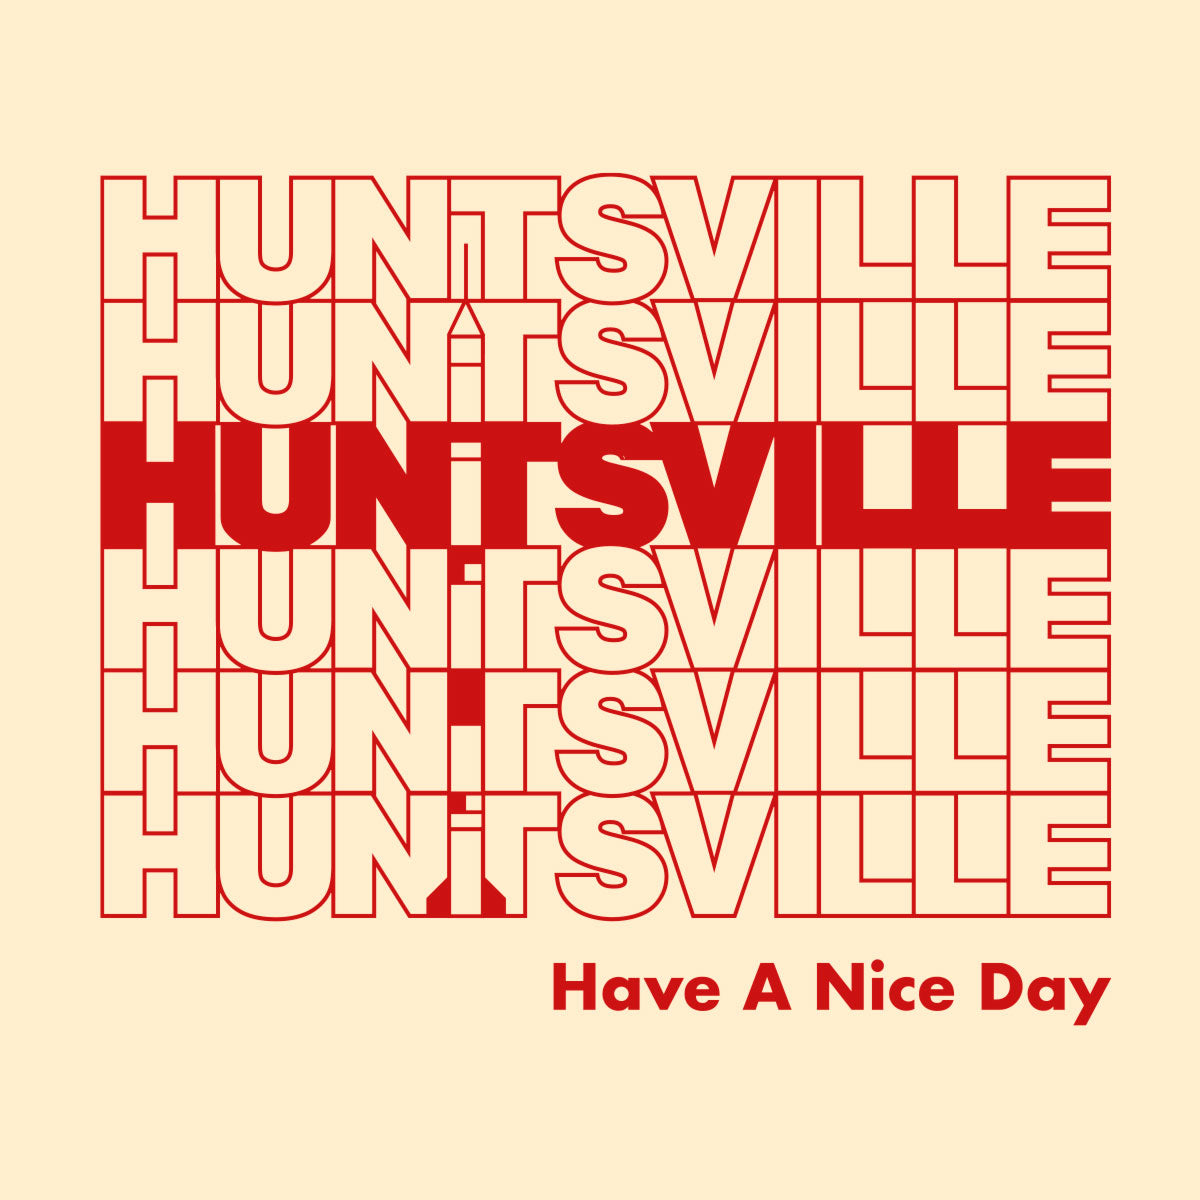 Thumbnail of red text "Huntsville Have a Nice Day" on white background 